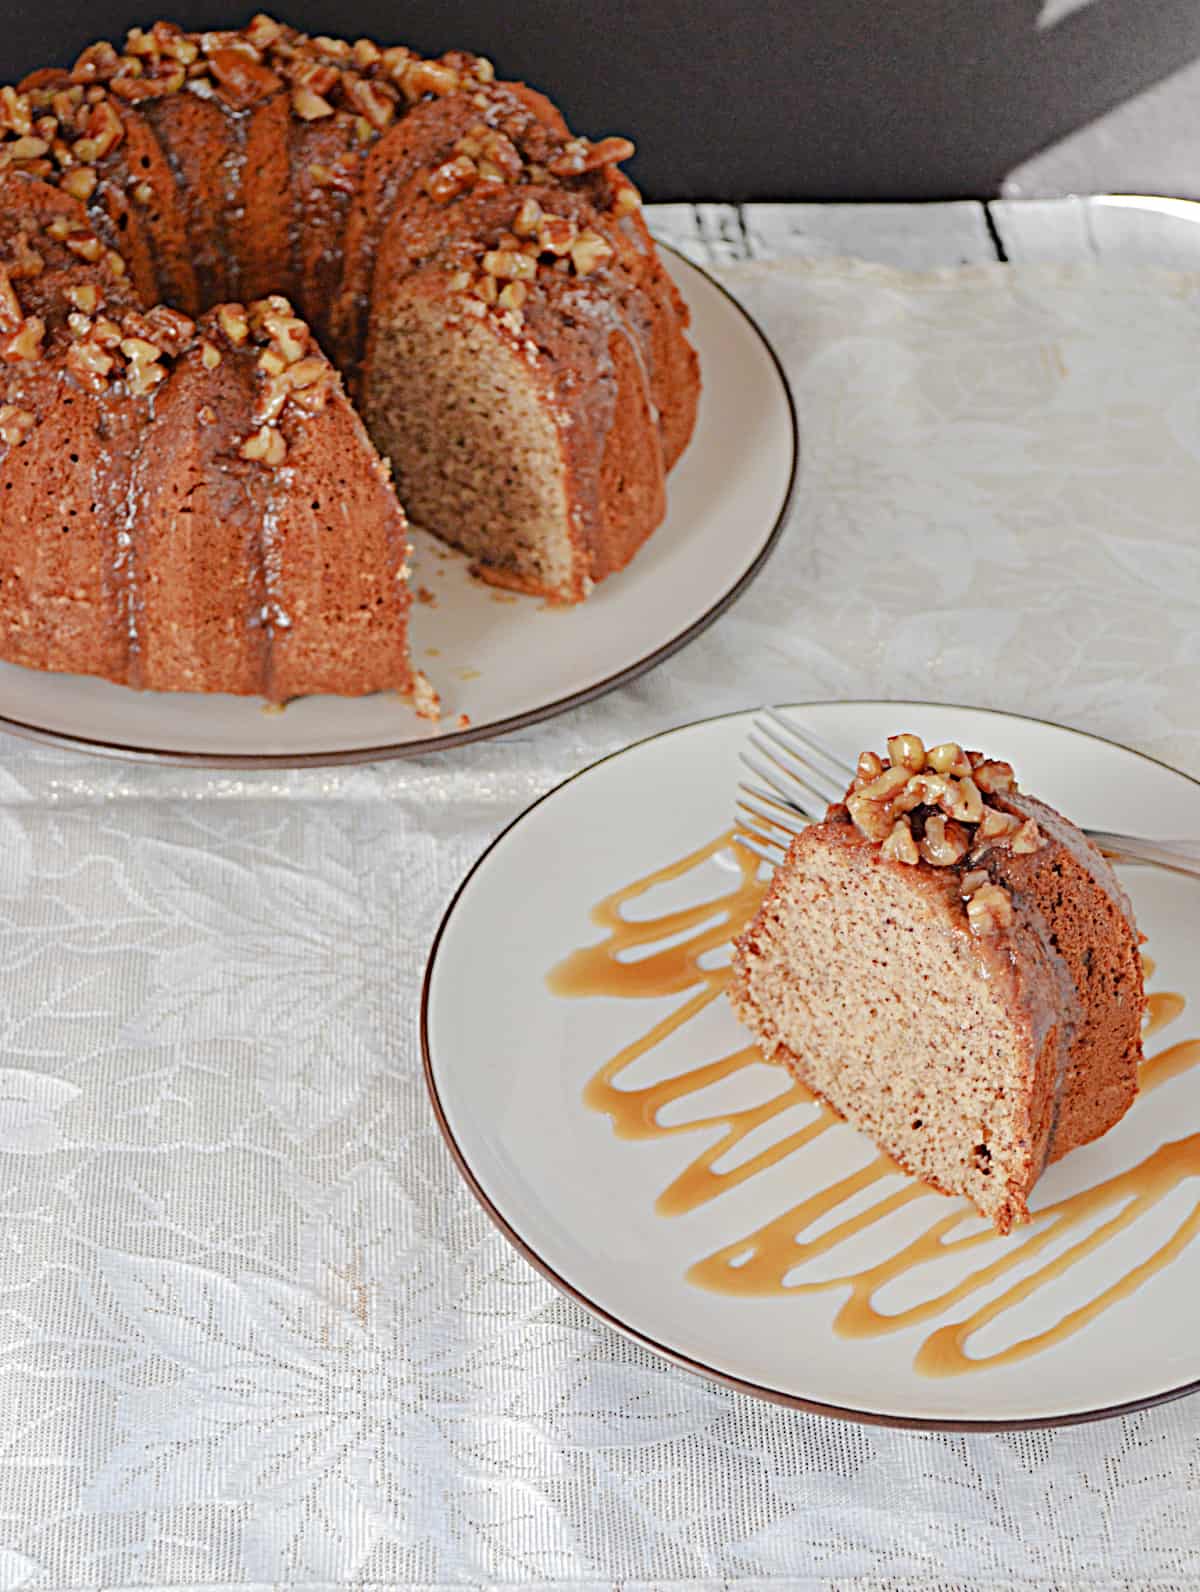 A close up of a slice of pecan cake drizzled with caramel and the whole Bundt cake before it. 